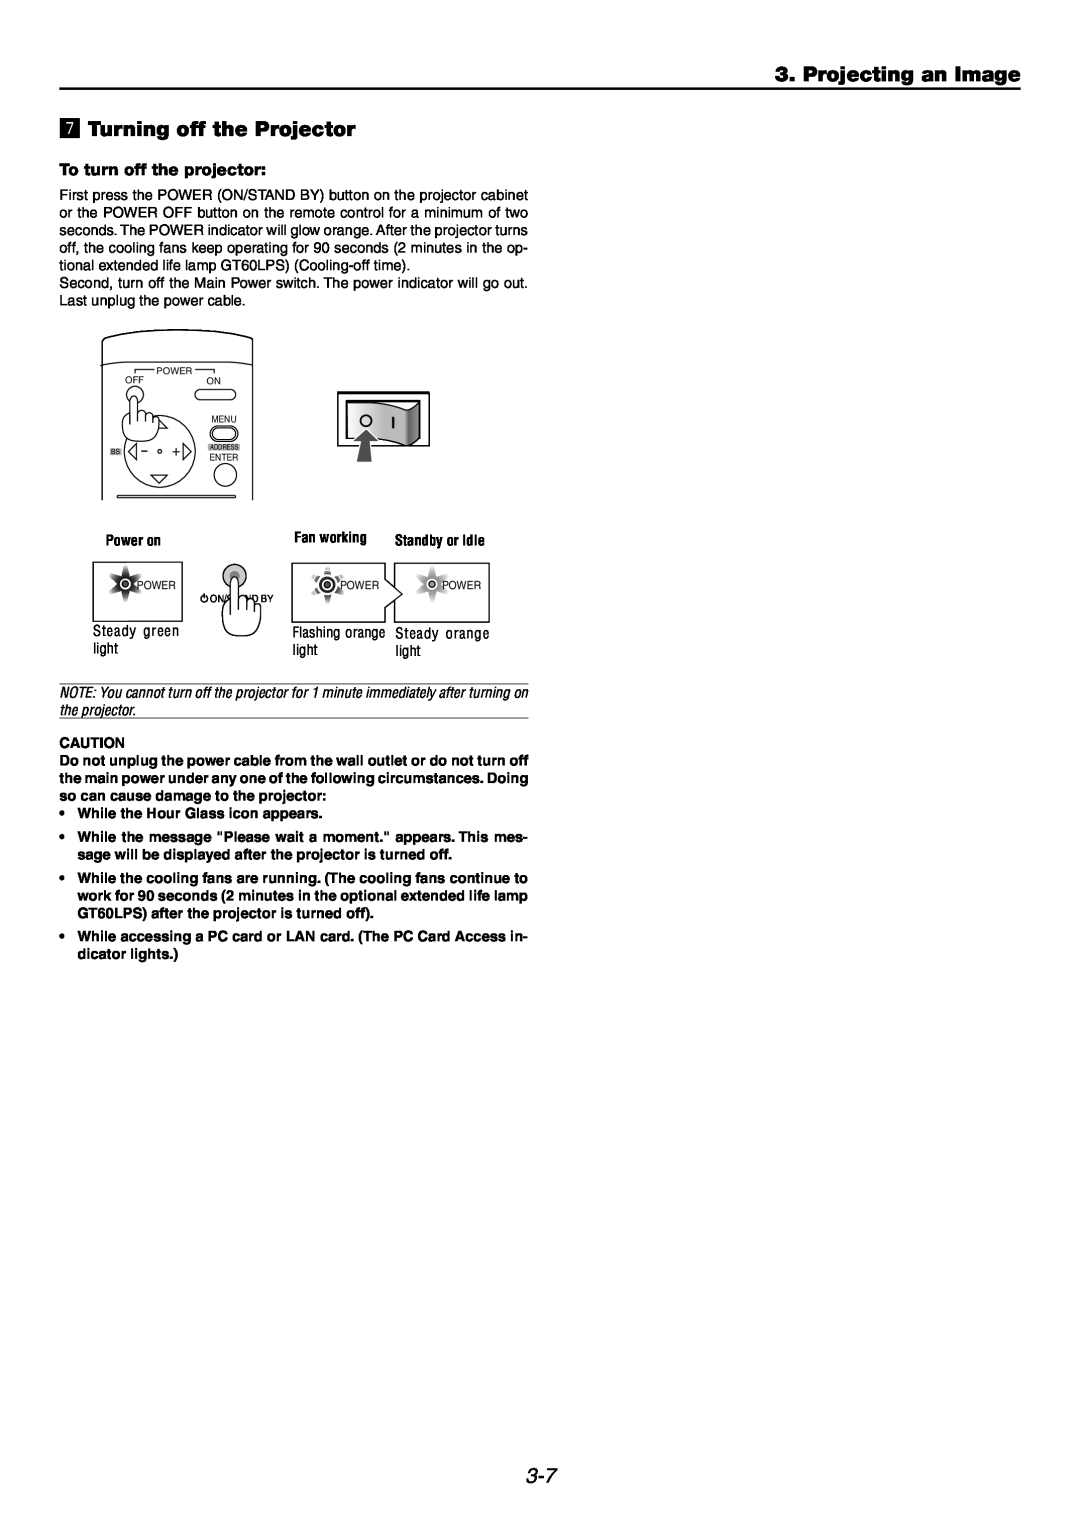 NEC GT6000 user manual Projecting an Image, m Turning off the Projector, To turn off the projector 